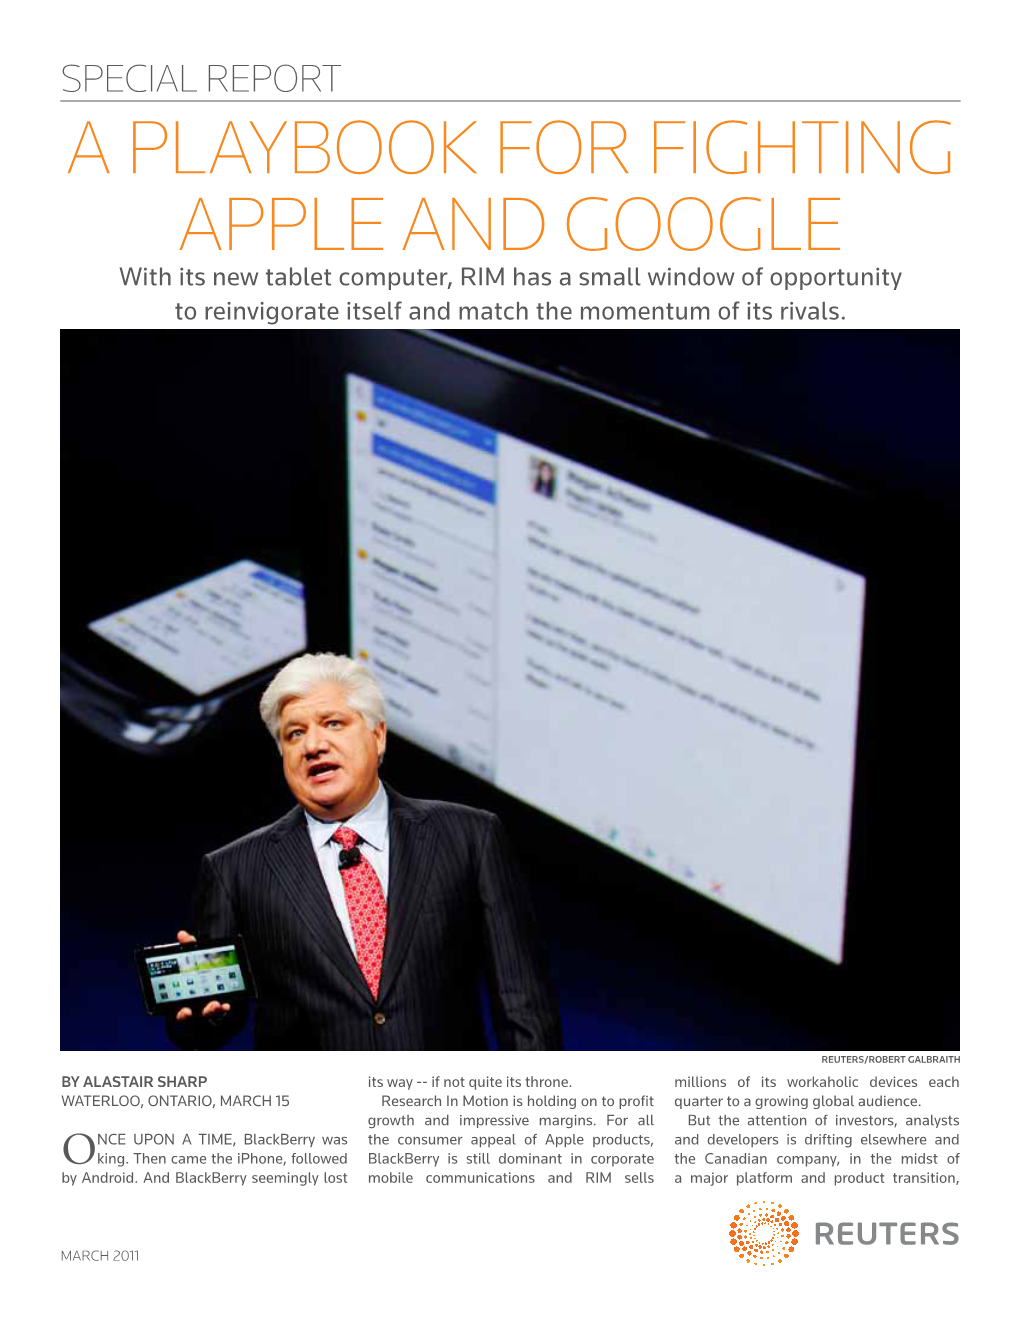 A Playbook for Fighting Apple and Google